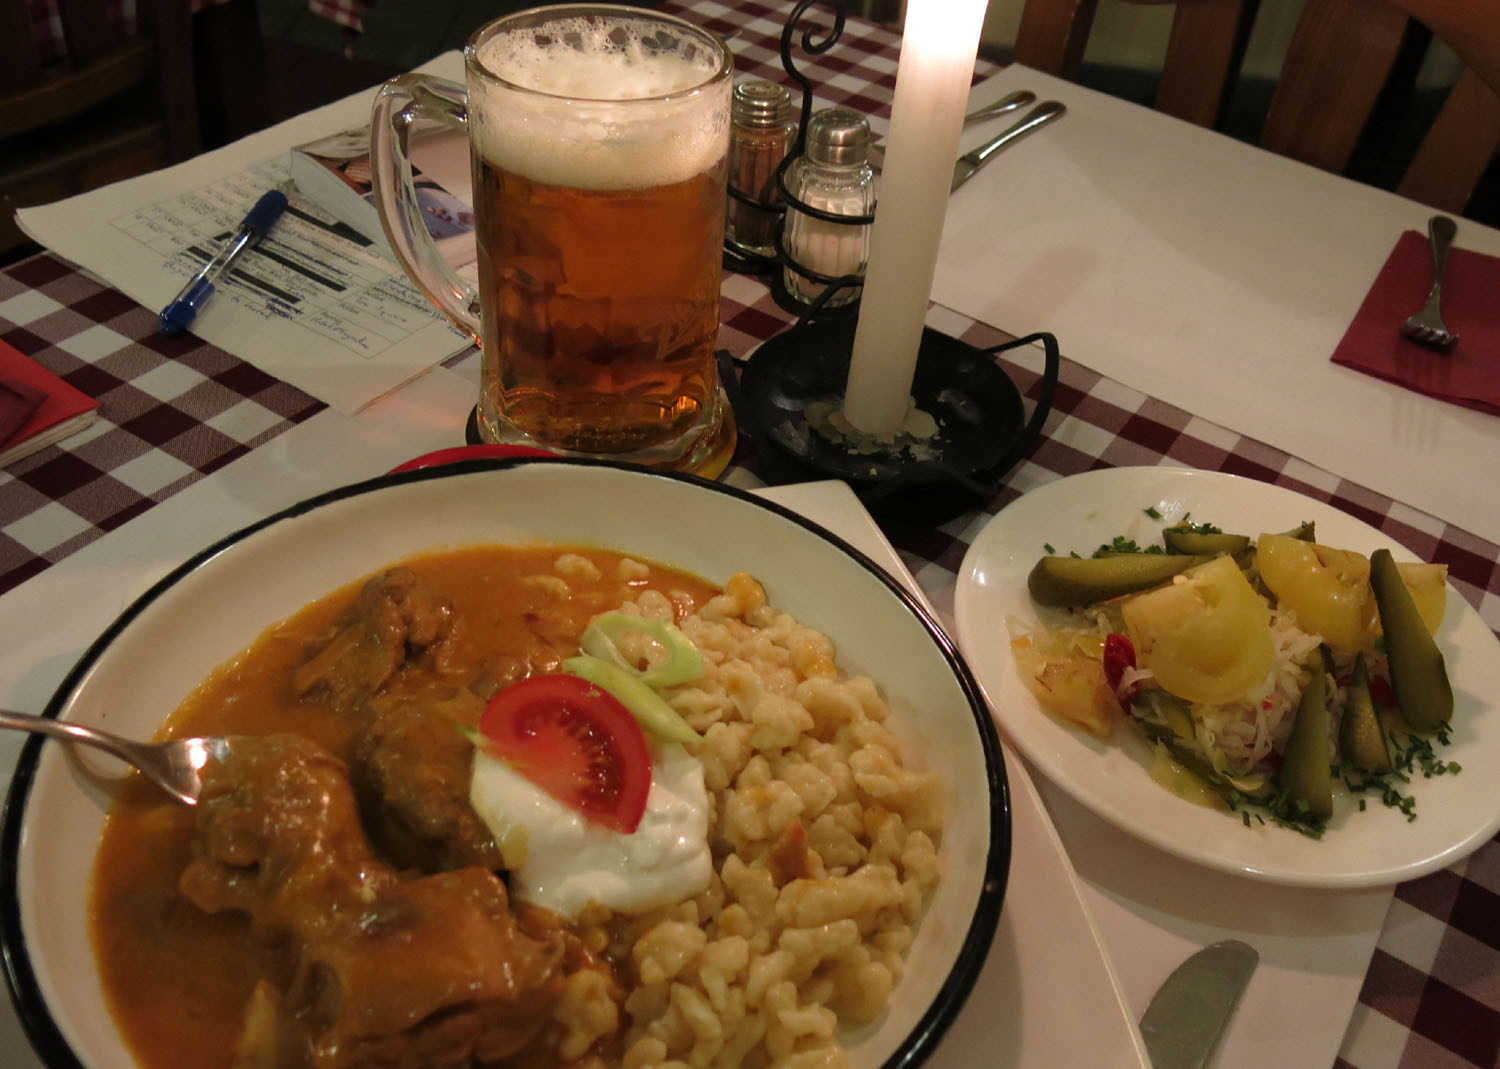 Hungary-Budapest-Food-And-Drink-Chicken-Dumplings